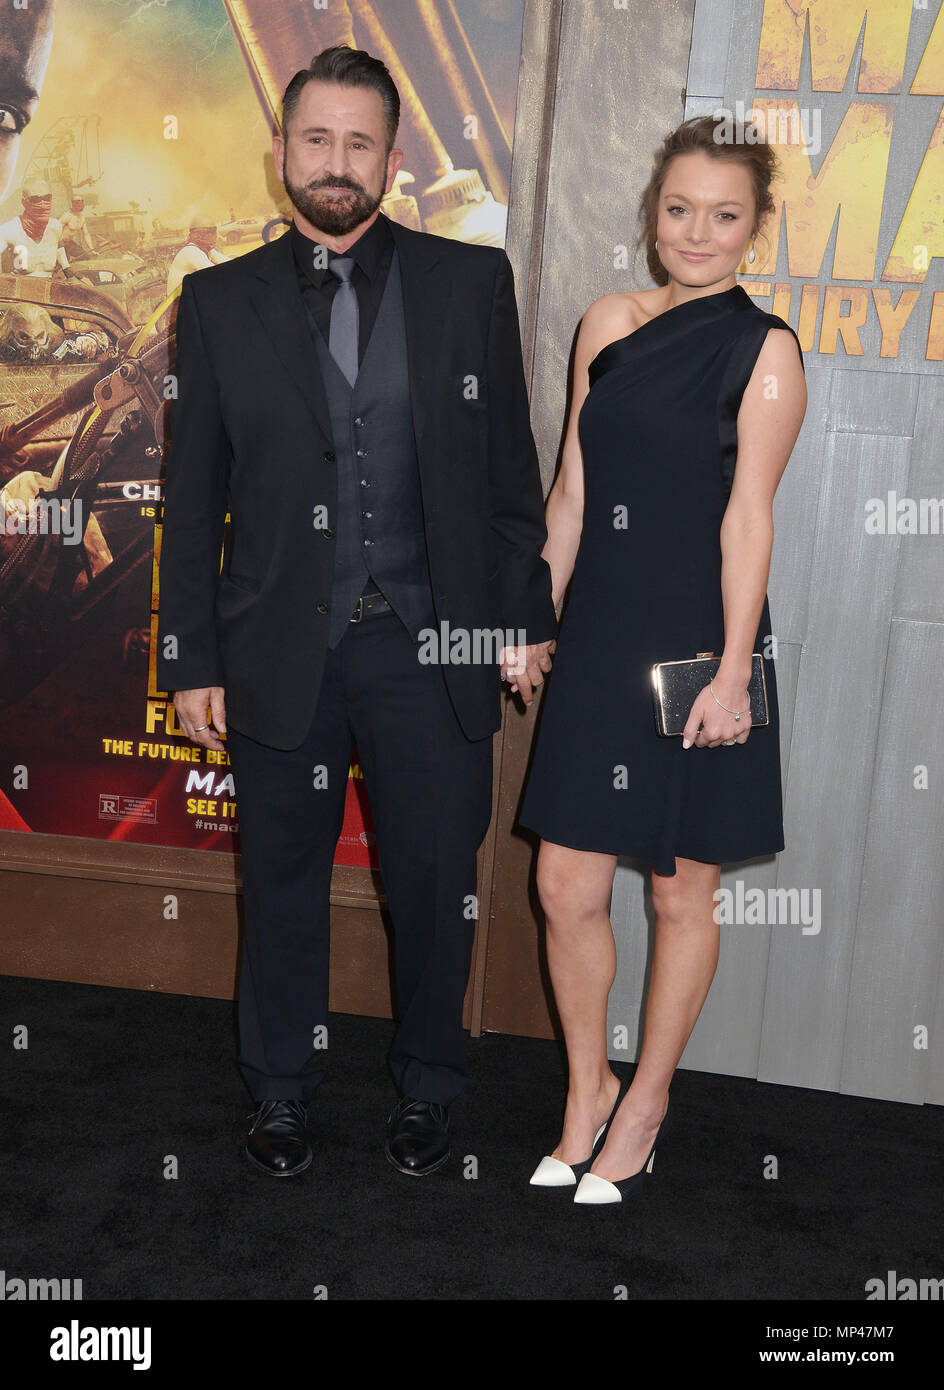 Gia Carides, Anthony LaPaglia 066 arriving at the Mad Max Fury Road Premiere at the TCL Chinese Theatre in Los Angeles. May 7, 2015.Gia Carides, Anthony LaPaglia 066 ------------- Red Carpet Event, Vertical, USA, Film Industry, Celebrities,  Photography, Bestof, Arts Culture and Entertainment, Topix Celebrities fashion /  Vertical, Best of, Event in Hollywood Life - California,  Red Carpet and backstage, USA, Film Industry, Celebrities,  movie celebrities, TV celebrities, Music celebrities, Photography, Bestof, Arts Culture and Entertainment,  Topix, vertical,  family from from the year , 2015 Stock Photo